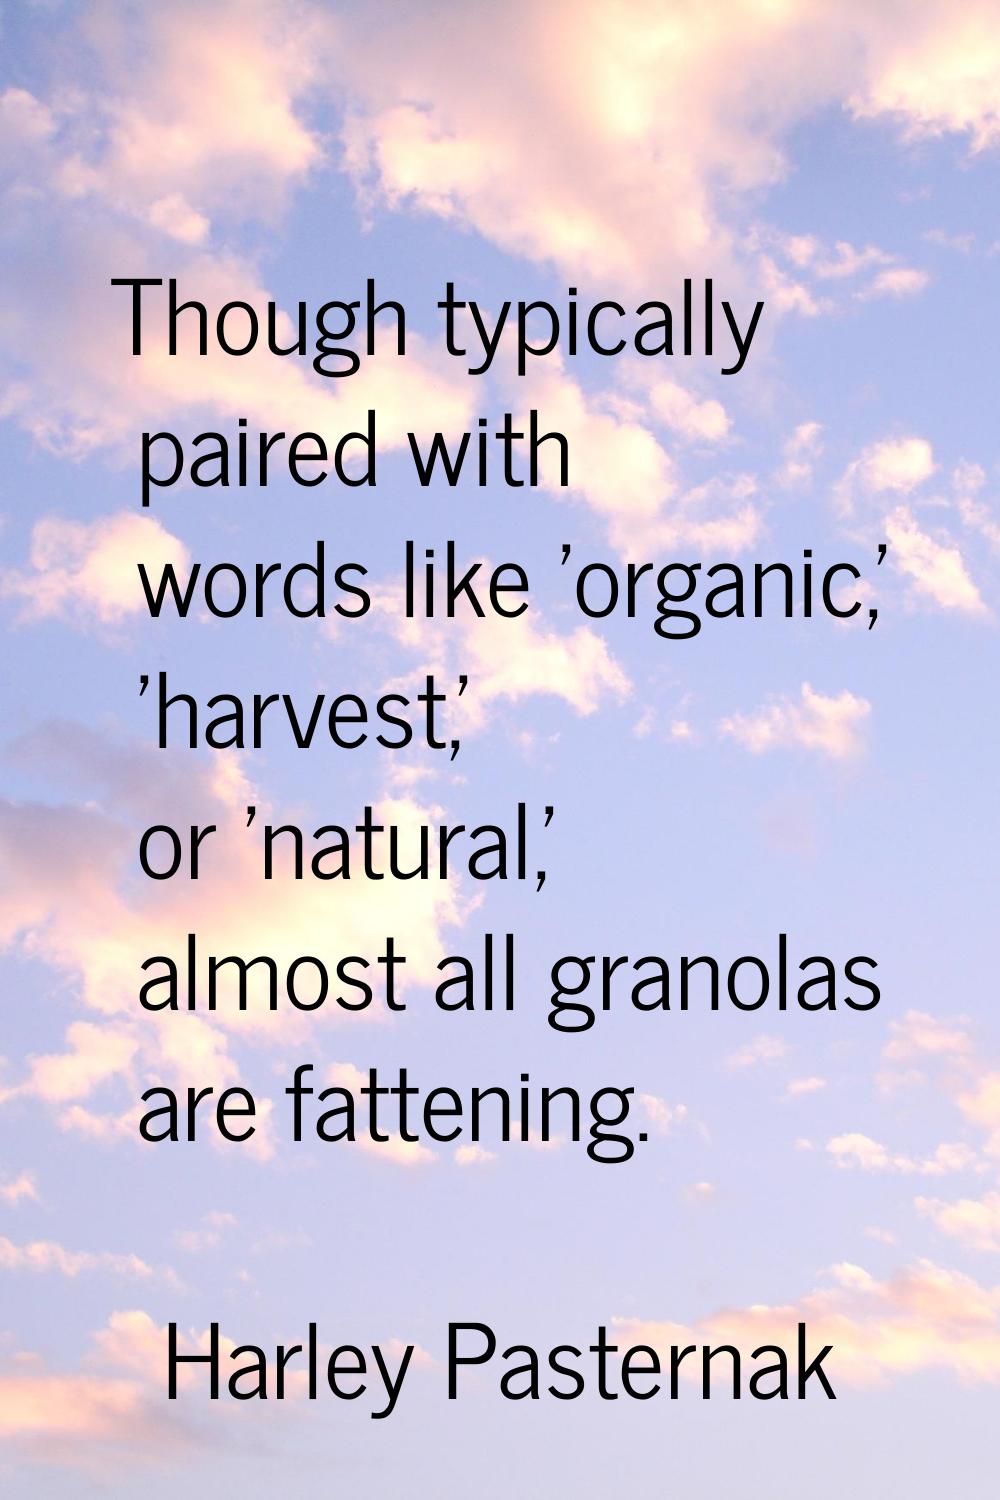 Though typically paired with words like 'organic,' 'harvest,' or 'natural,' almost all granolas are